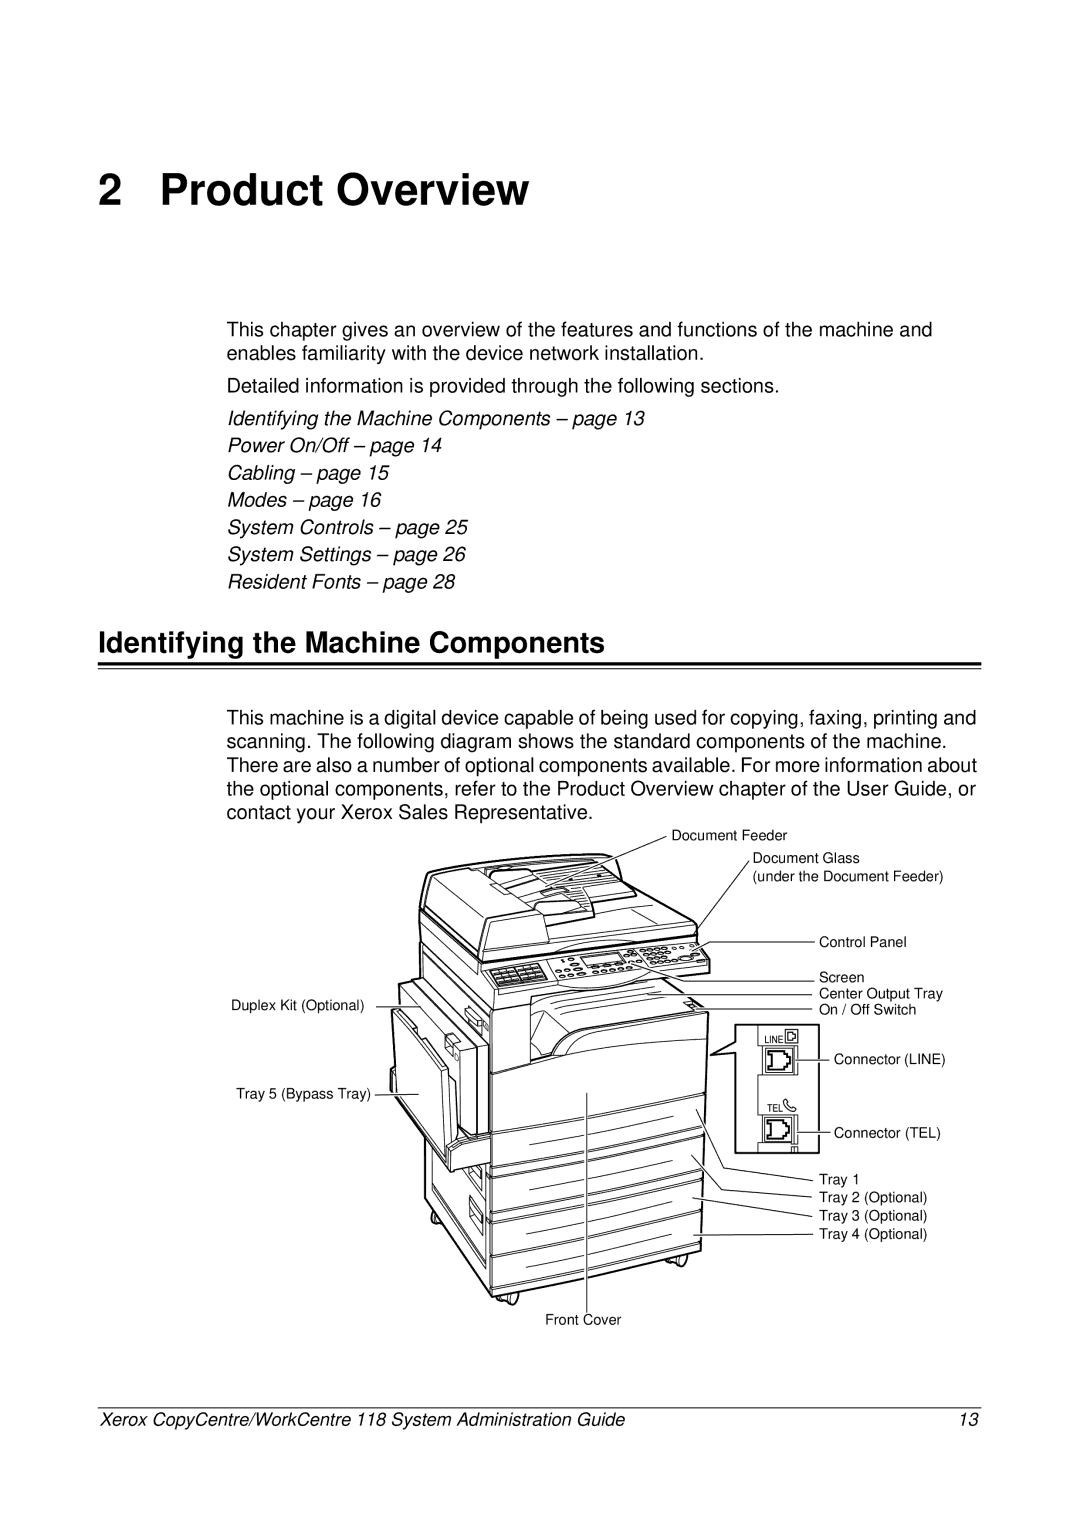 Xerox 701P42722_EN manual Product Overview, Identifying the Machine Components 